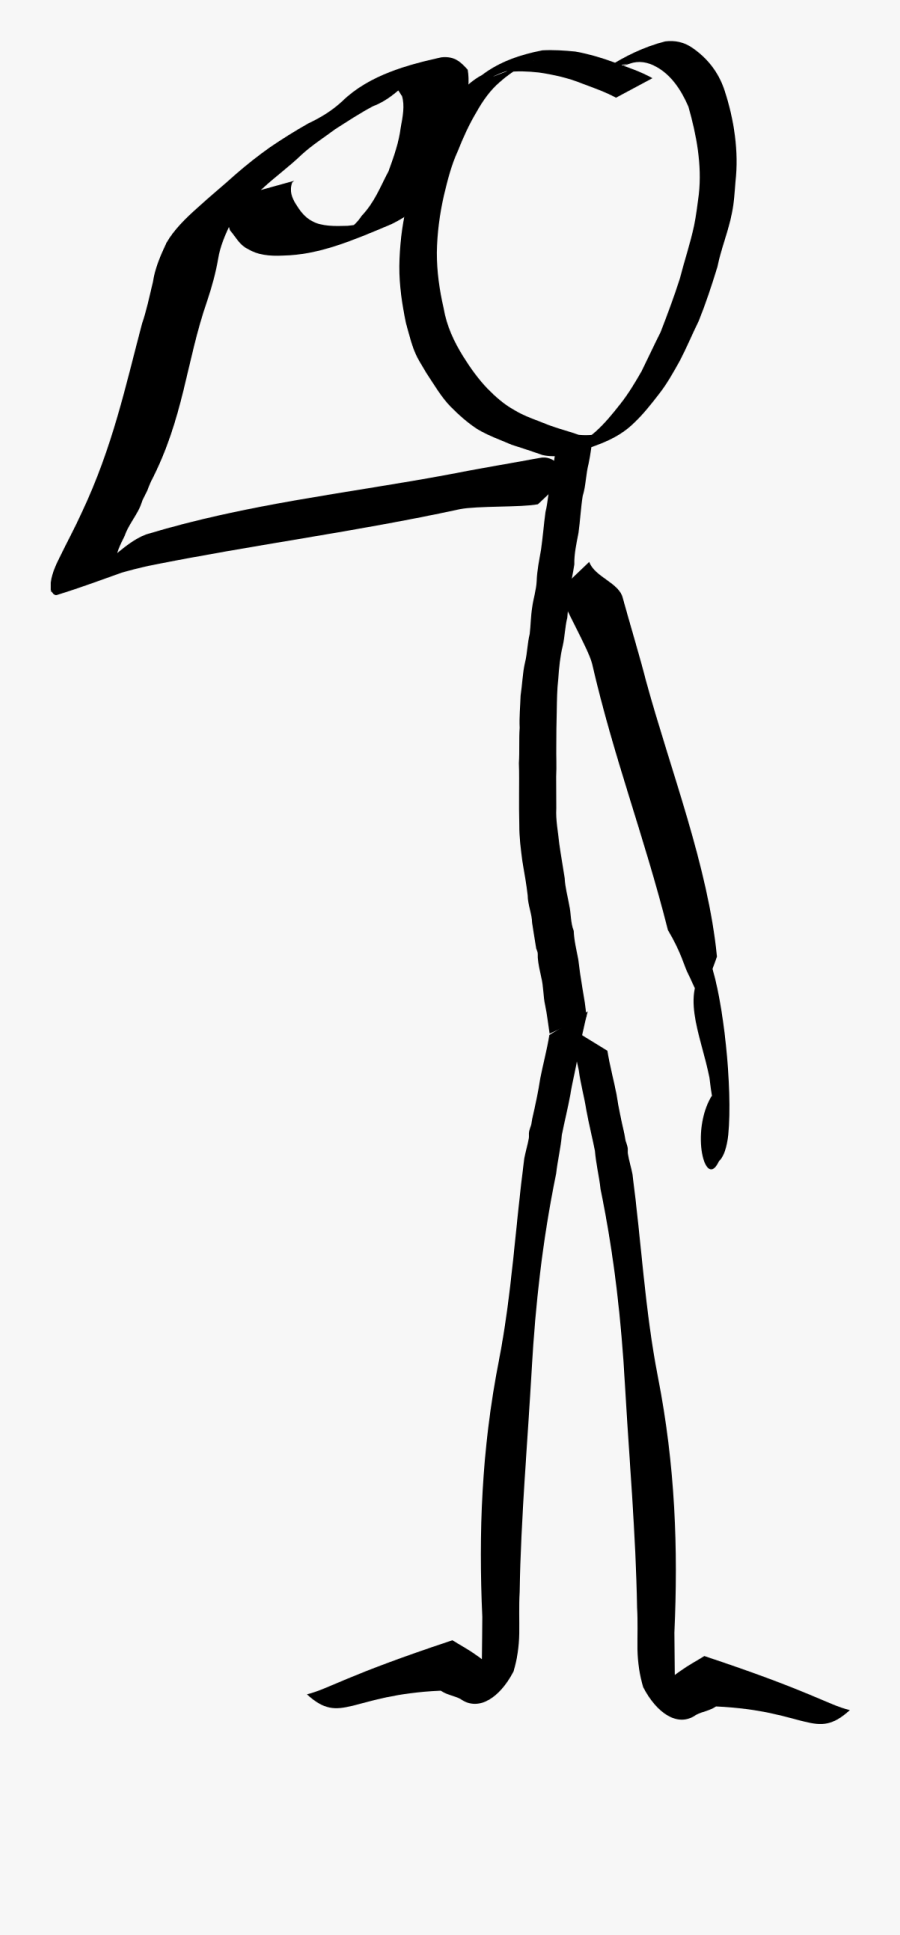 Stickyman Military Salute - Stick Figure Thinking Png, Transparent Clipart